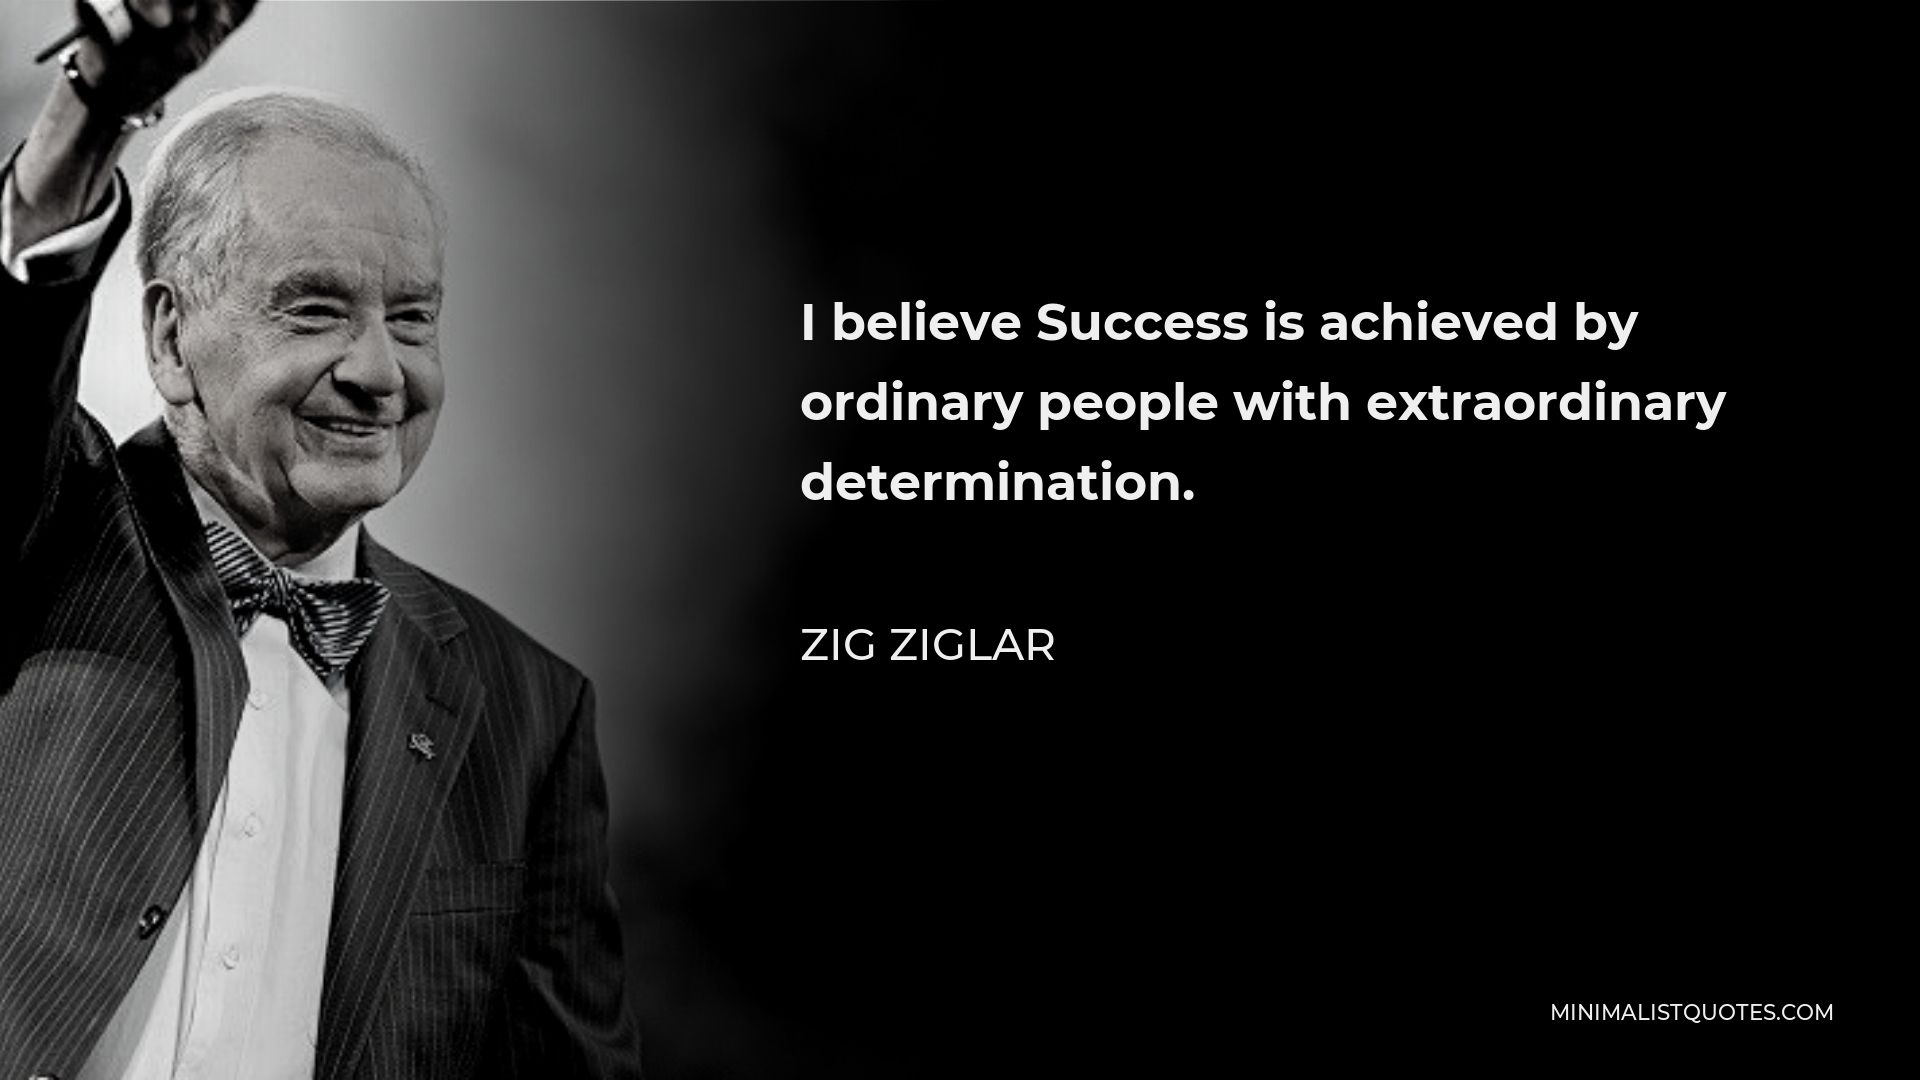 Zig Ziglar Quote - I believe Success is achieved by ordinary people with extraordinary determination.